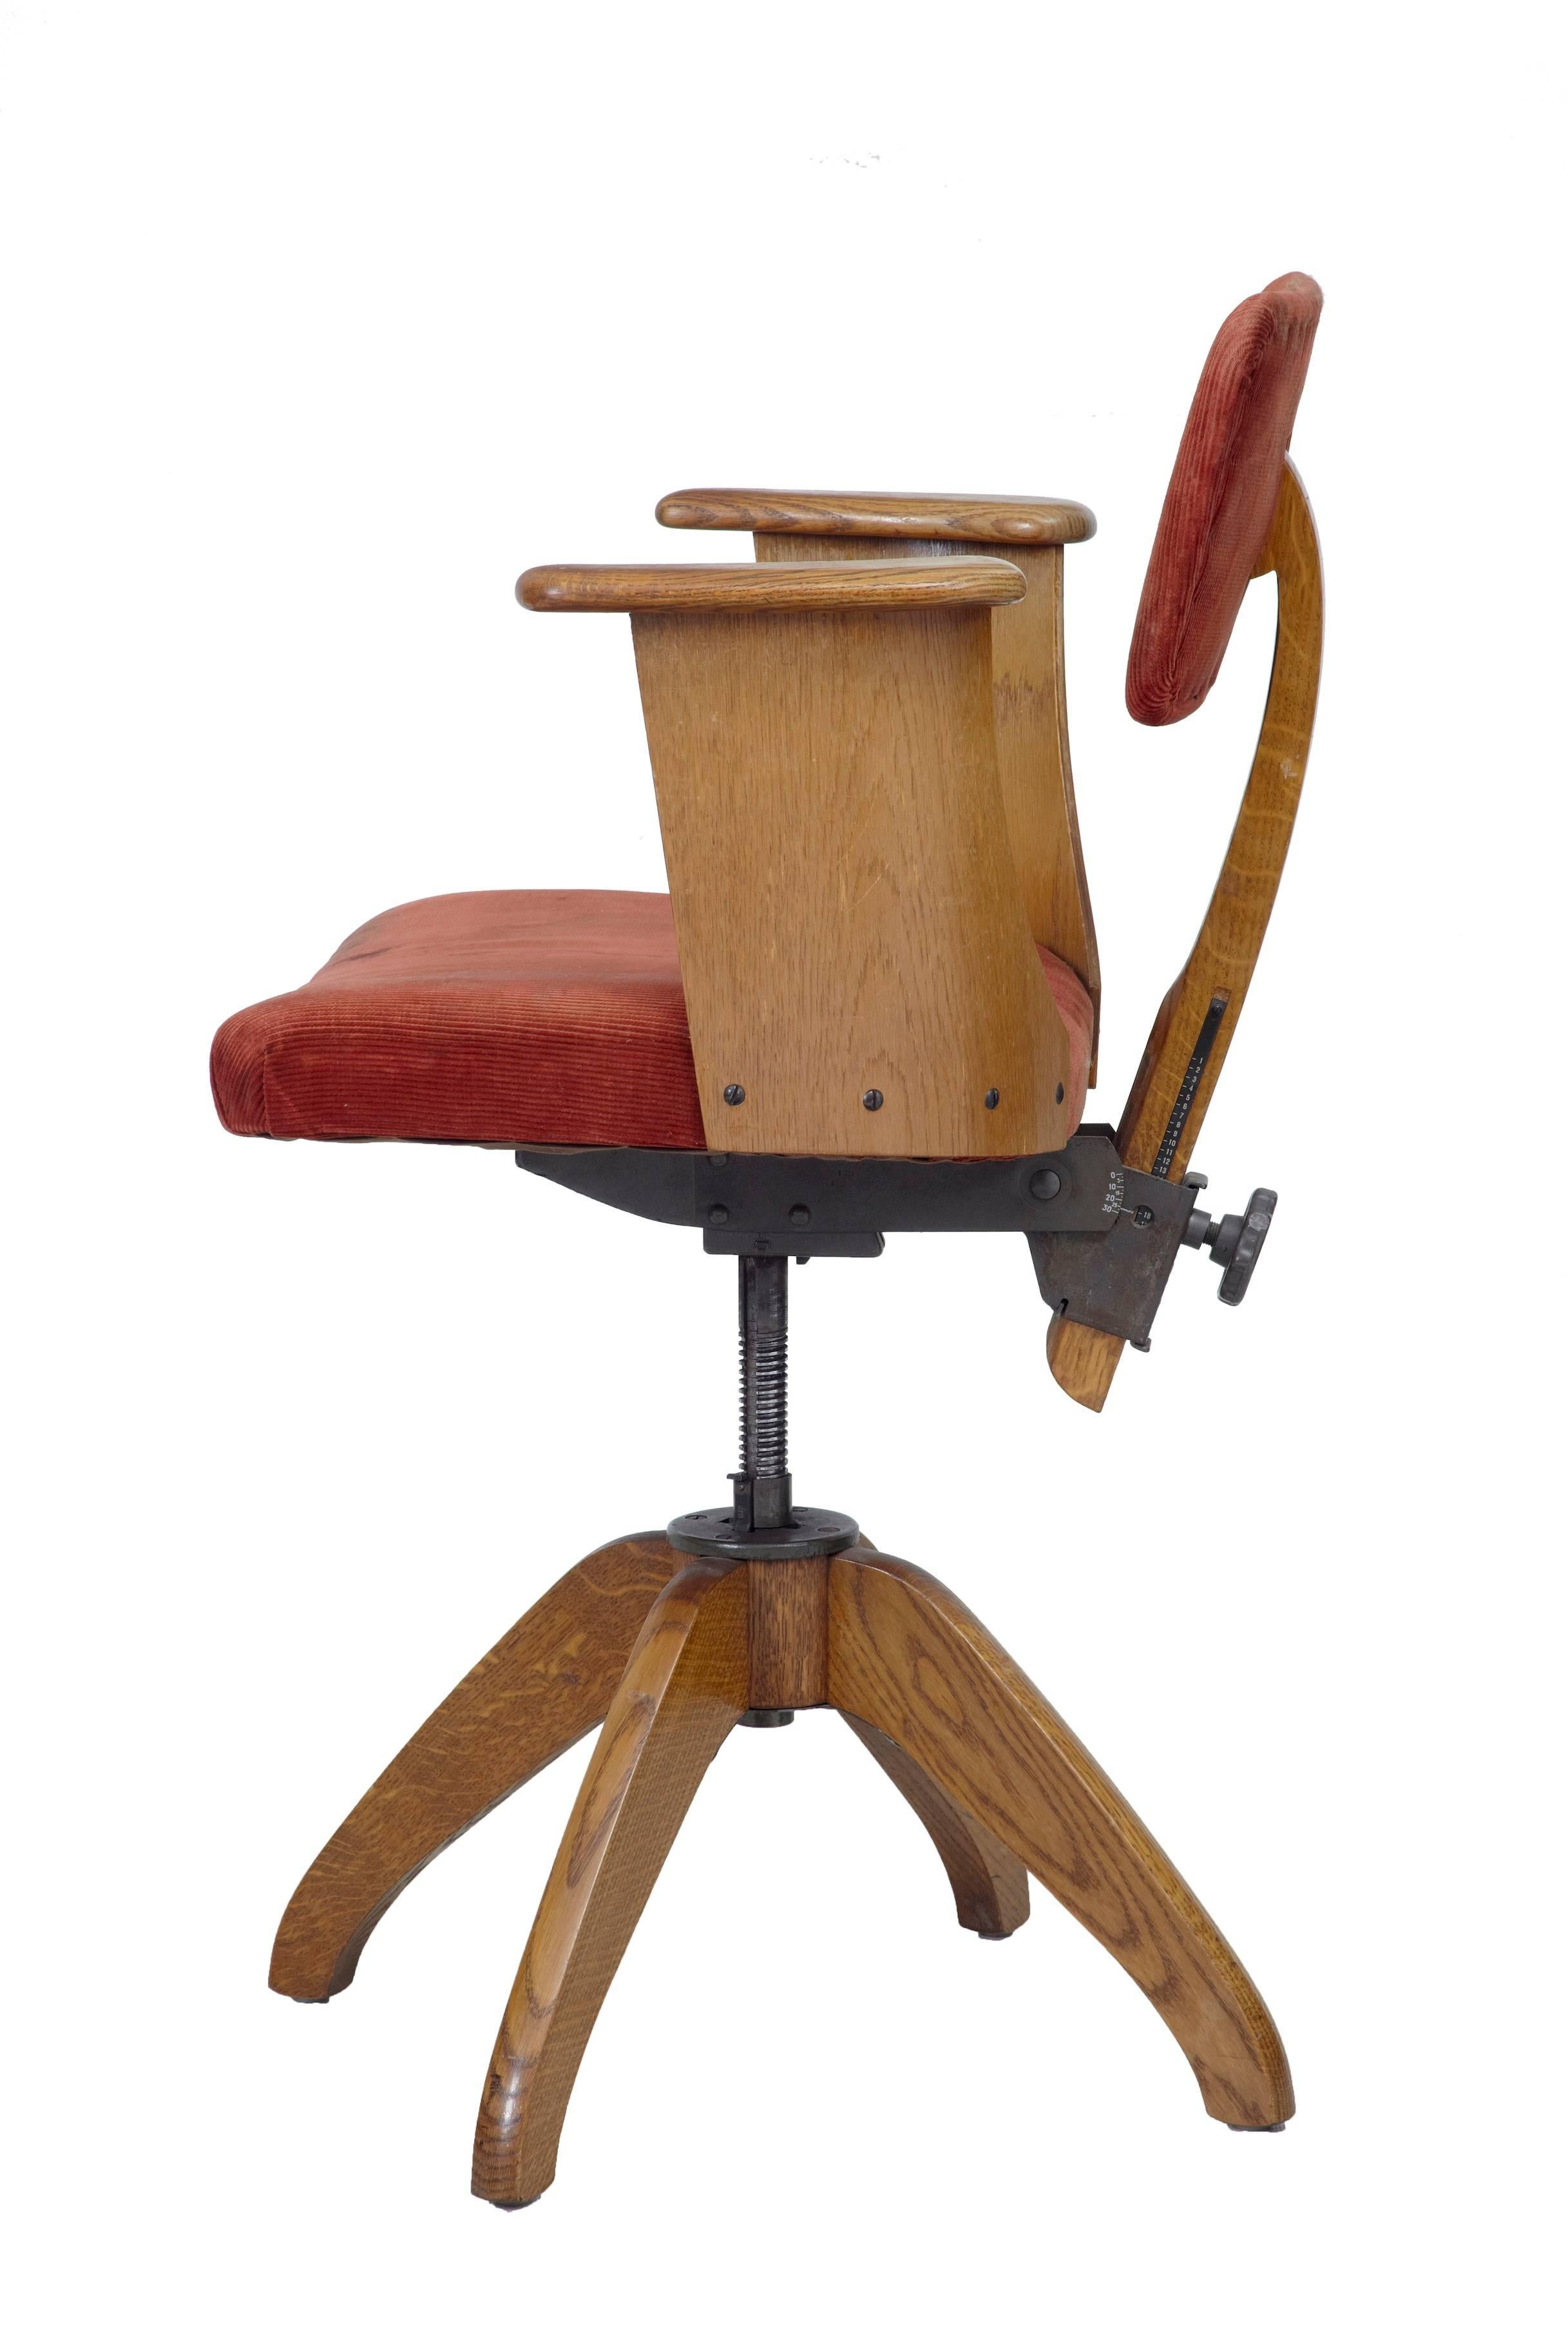 1920s oak adjustable office desk chair. Oak wrap round arms and four legged base. Red cordroy seat and backrest. Fully adjustable.
 